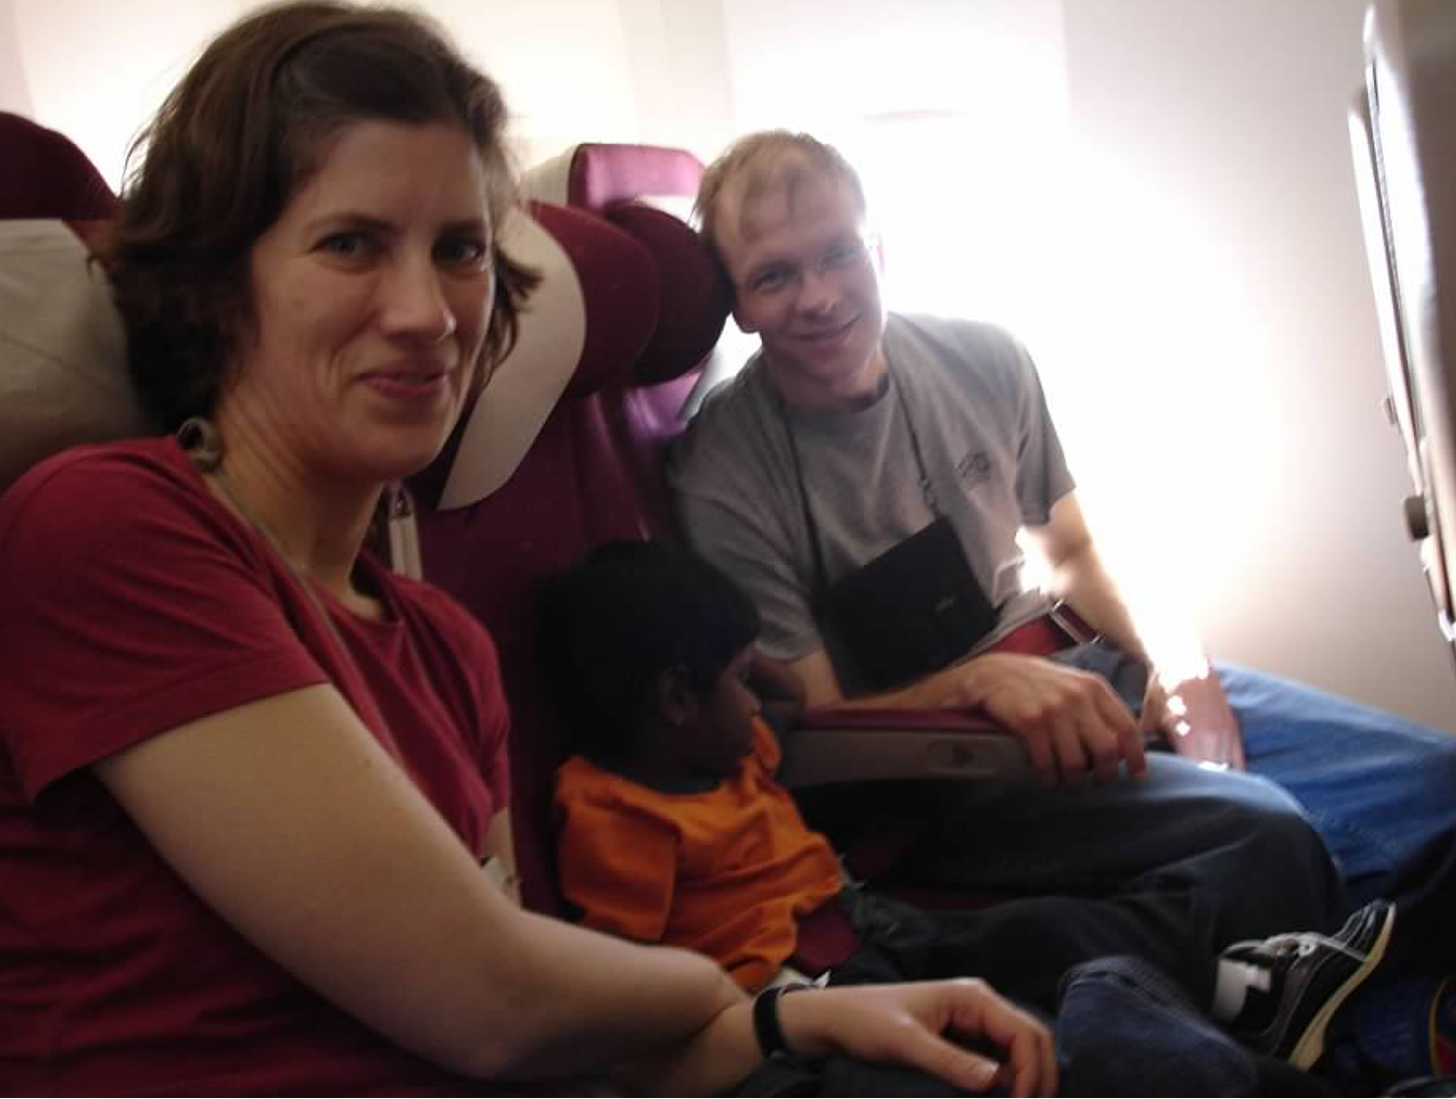 A family seated in airplane seats, the man and woman smiling at the camera with a sleeping child between them.